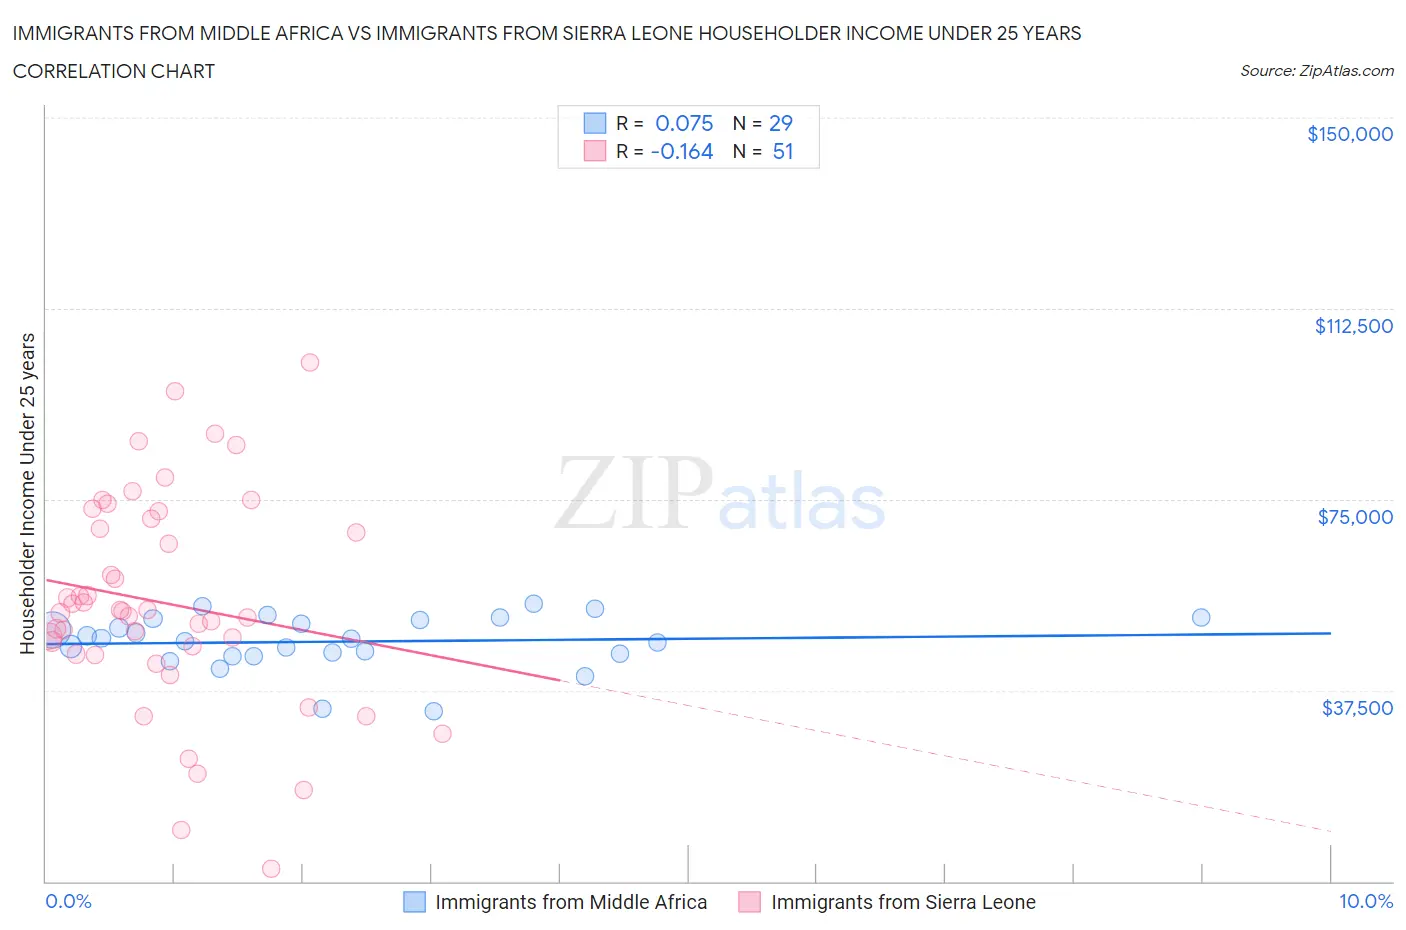 Immigrants from Middle Africa vs Immigrants from Sierra Leone Householder Income Under 25 years